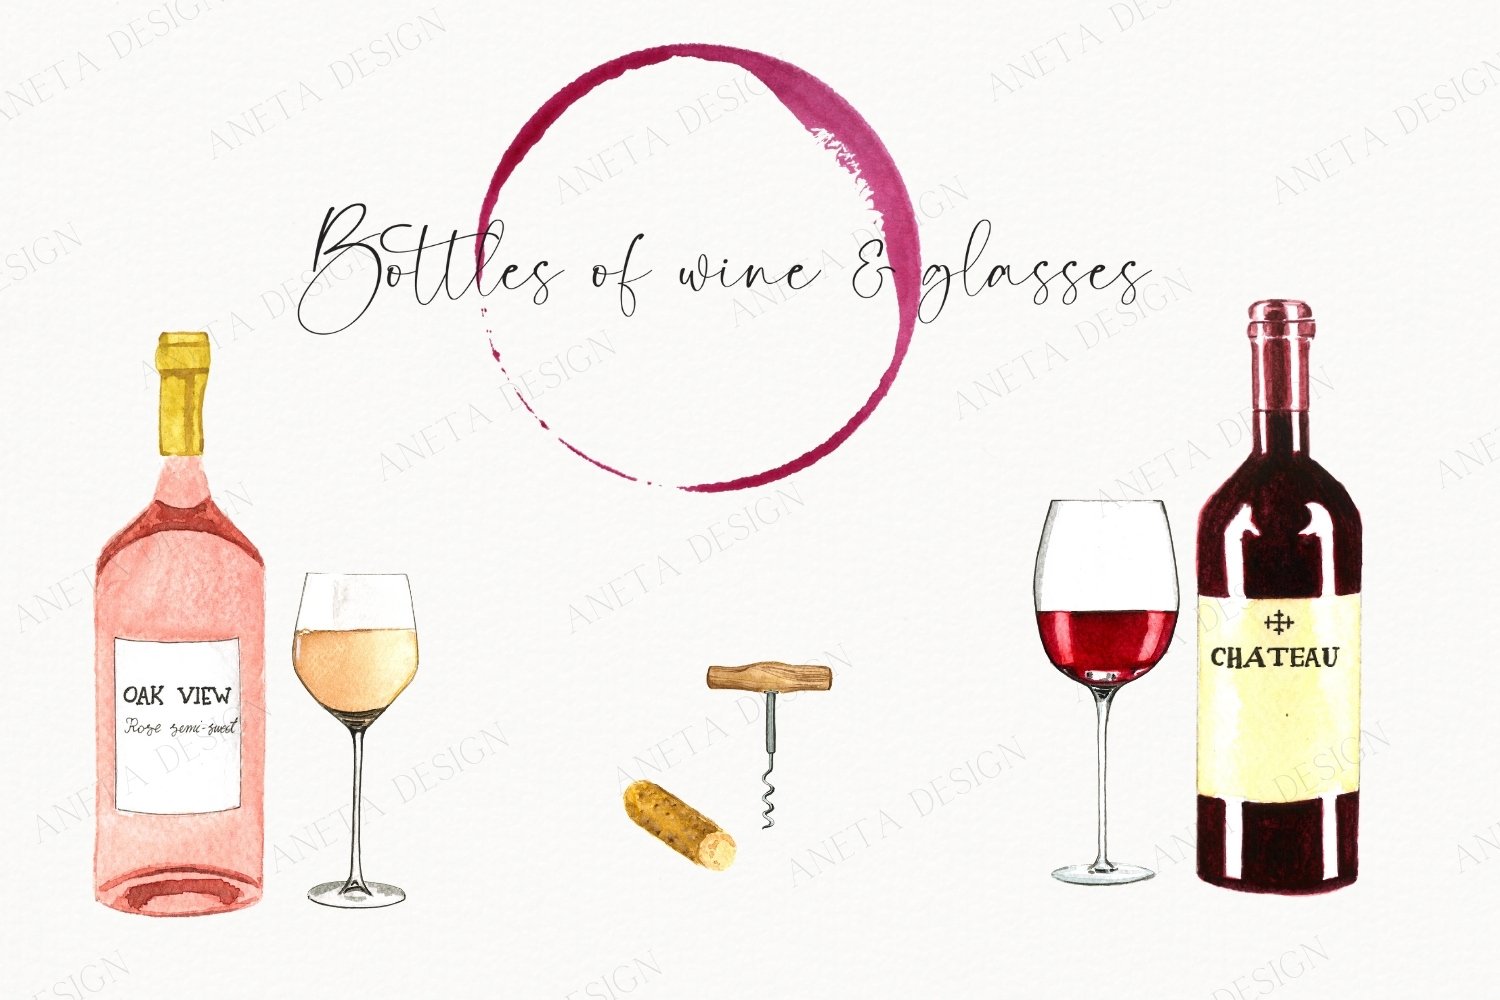 Charming image of wine bottles and wine glasses.